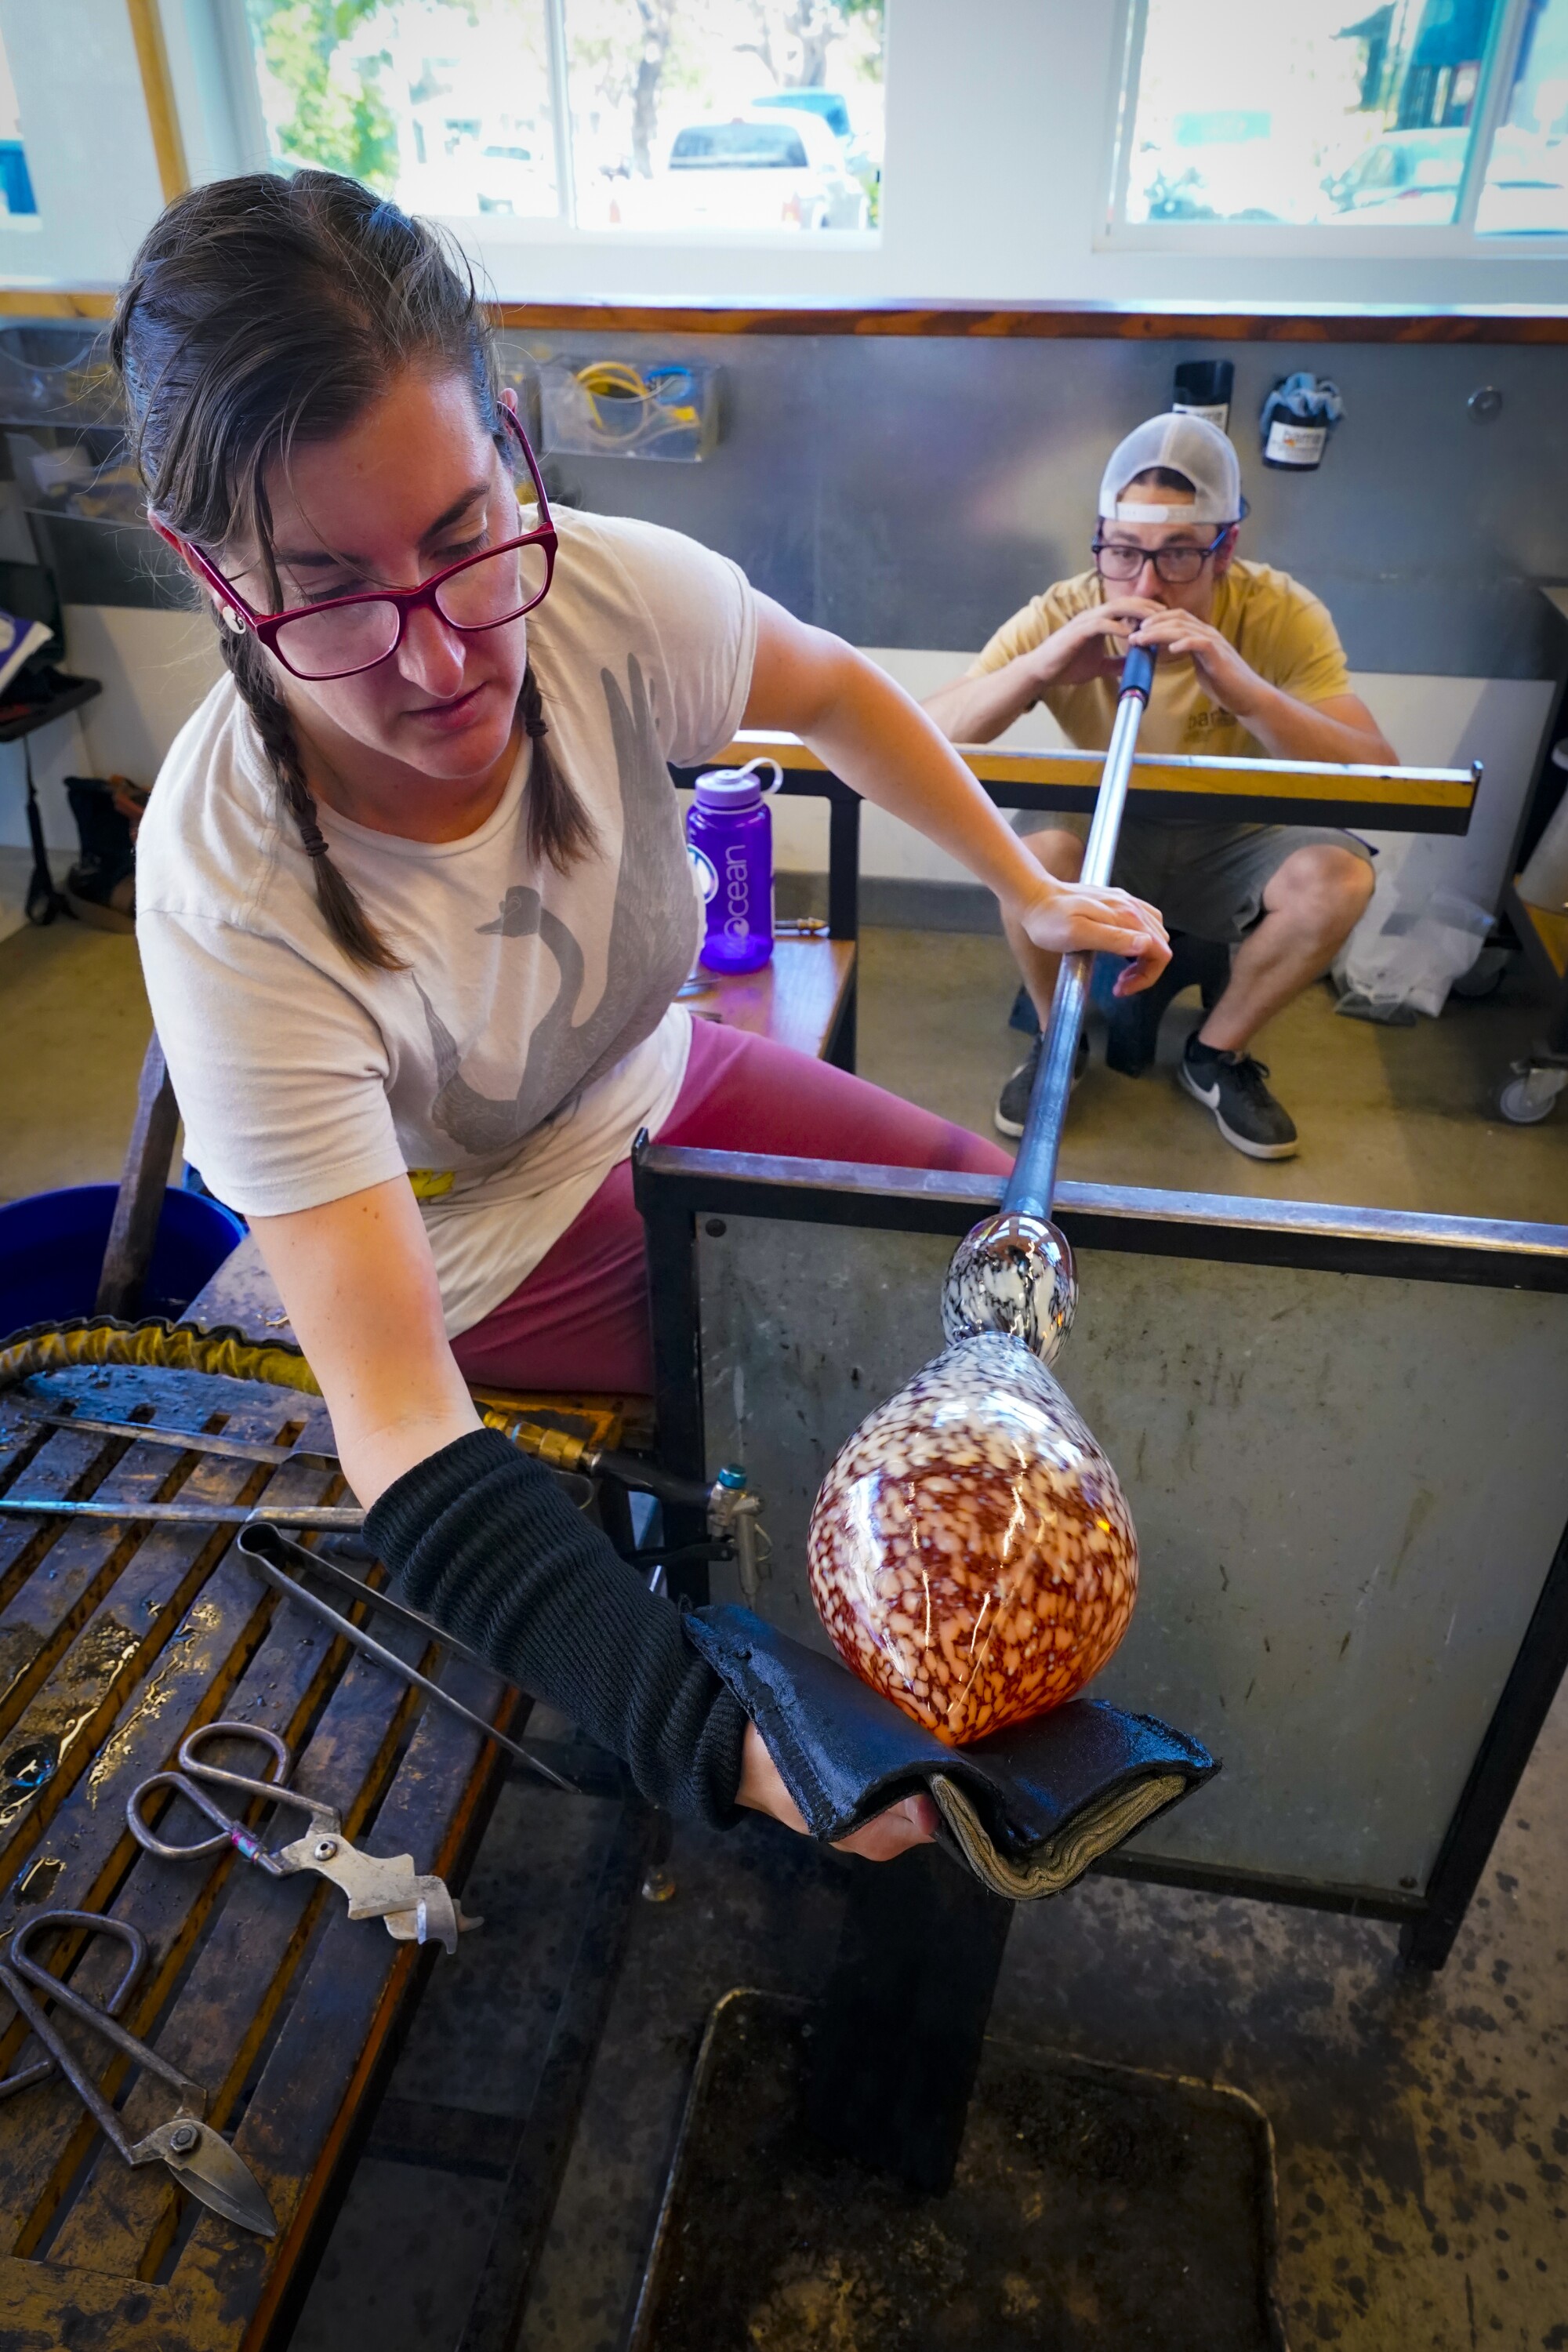 The glass artist works to shape the bowl with the help of an assistant who blows into the glass through a tube.